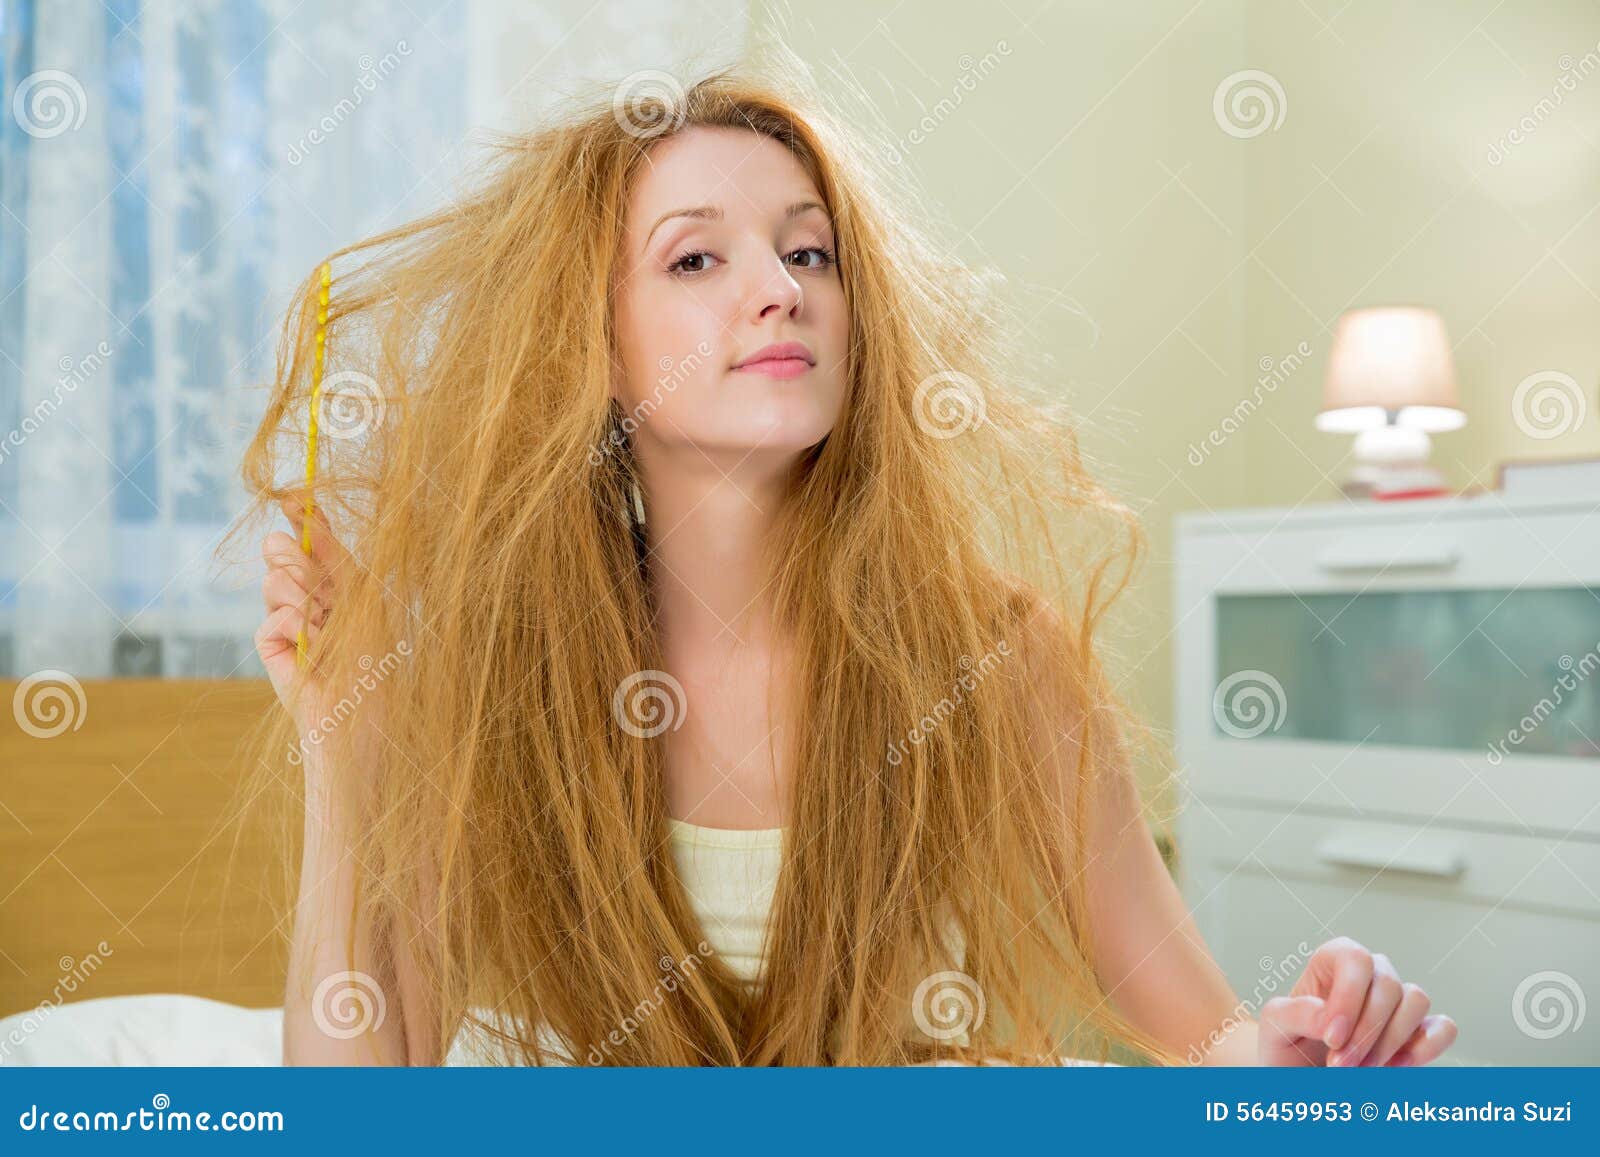 Young Beautiful Woman with Messy Hair Stock Image - Image of blonde, hair:  56459953